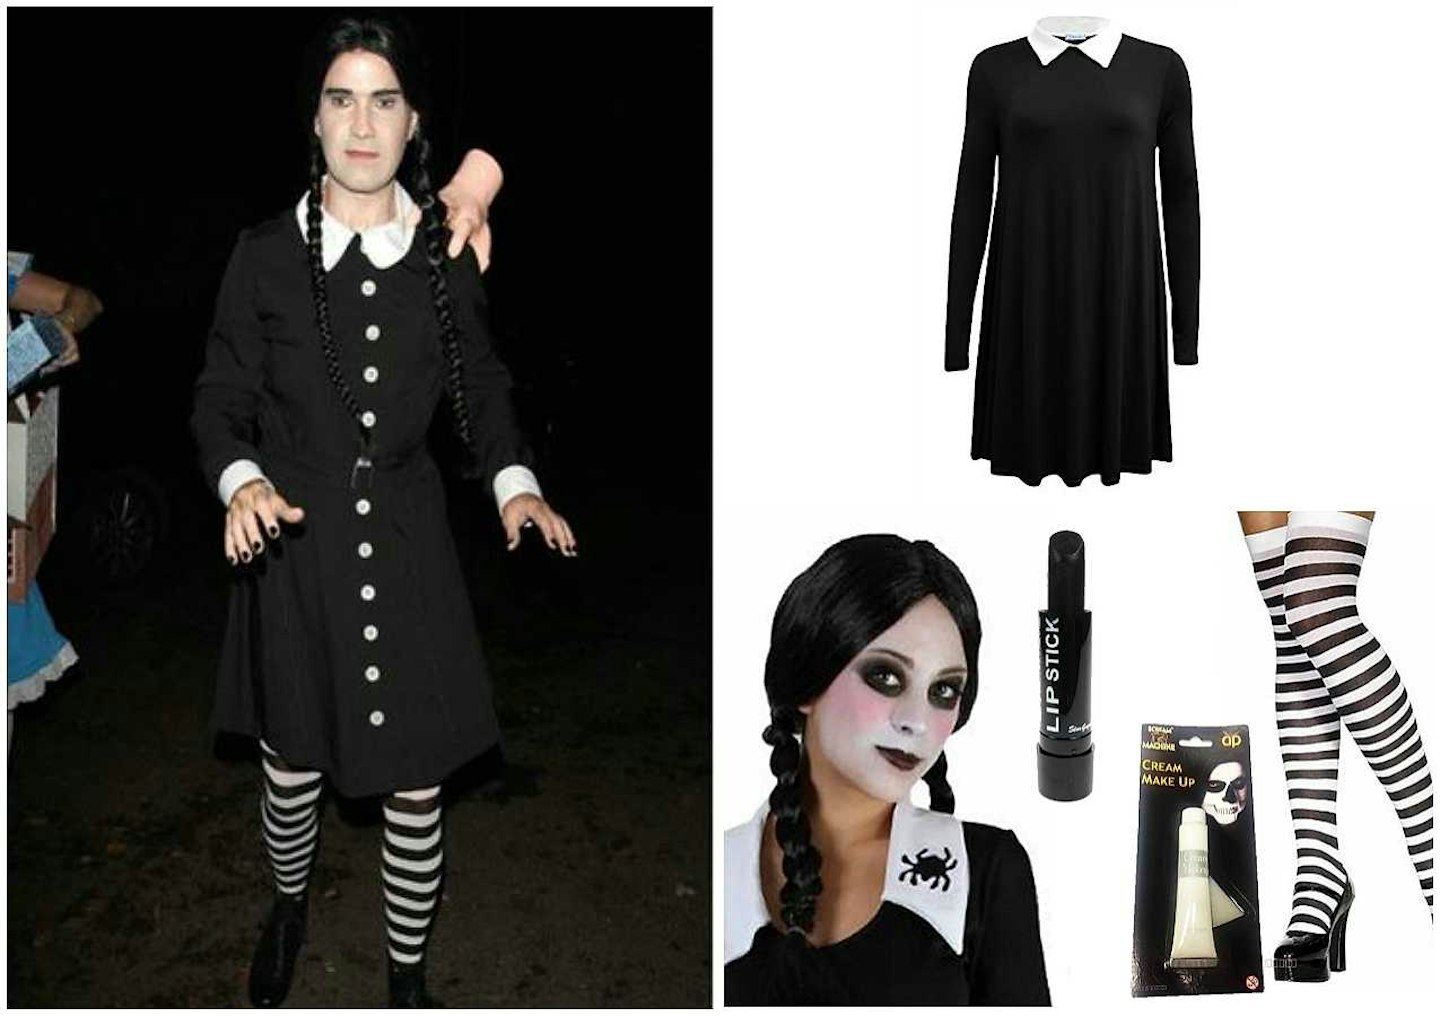 Jimmy Carr as Wednesday Addams from The Addams Family